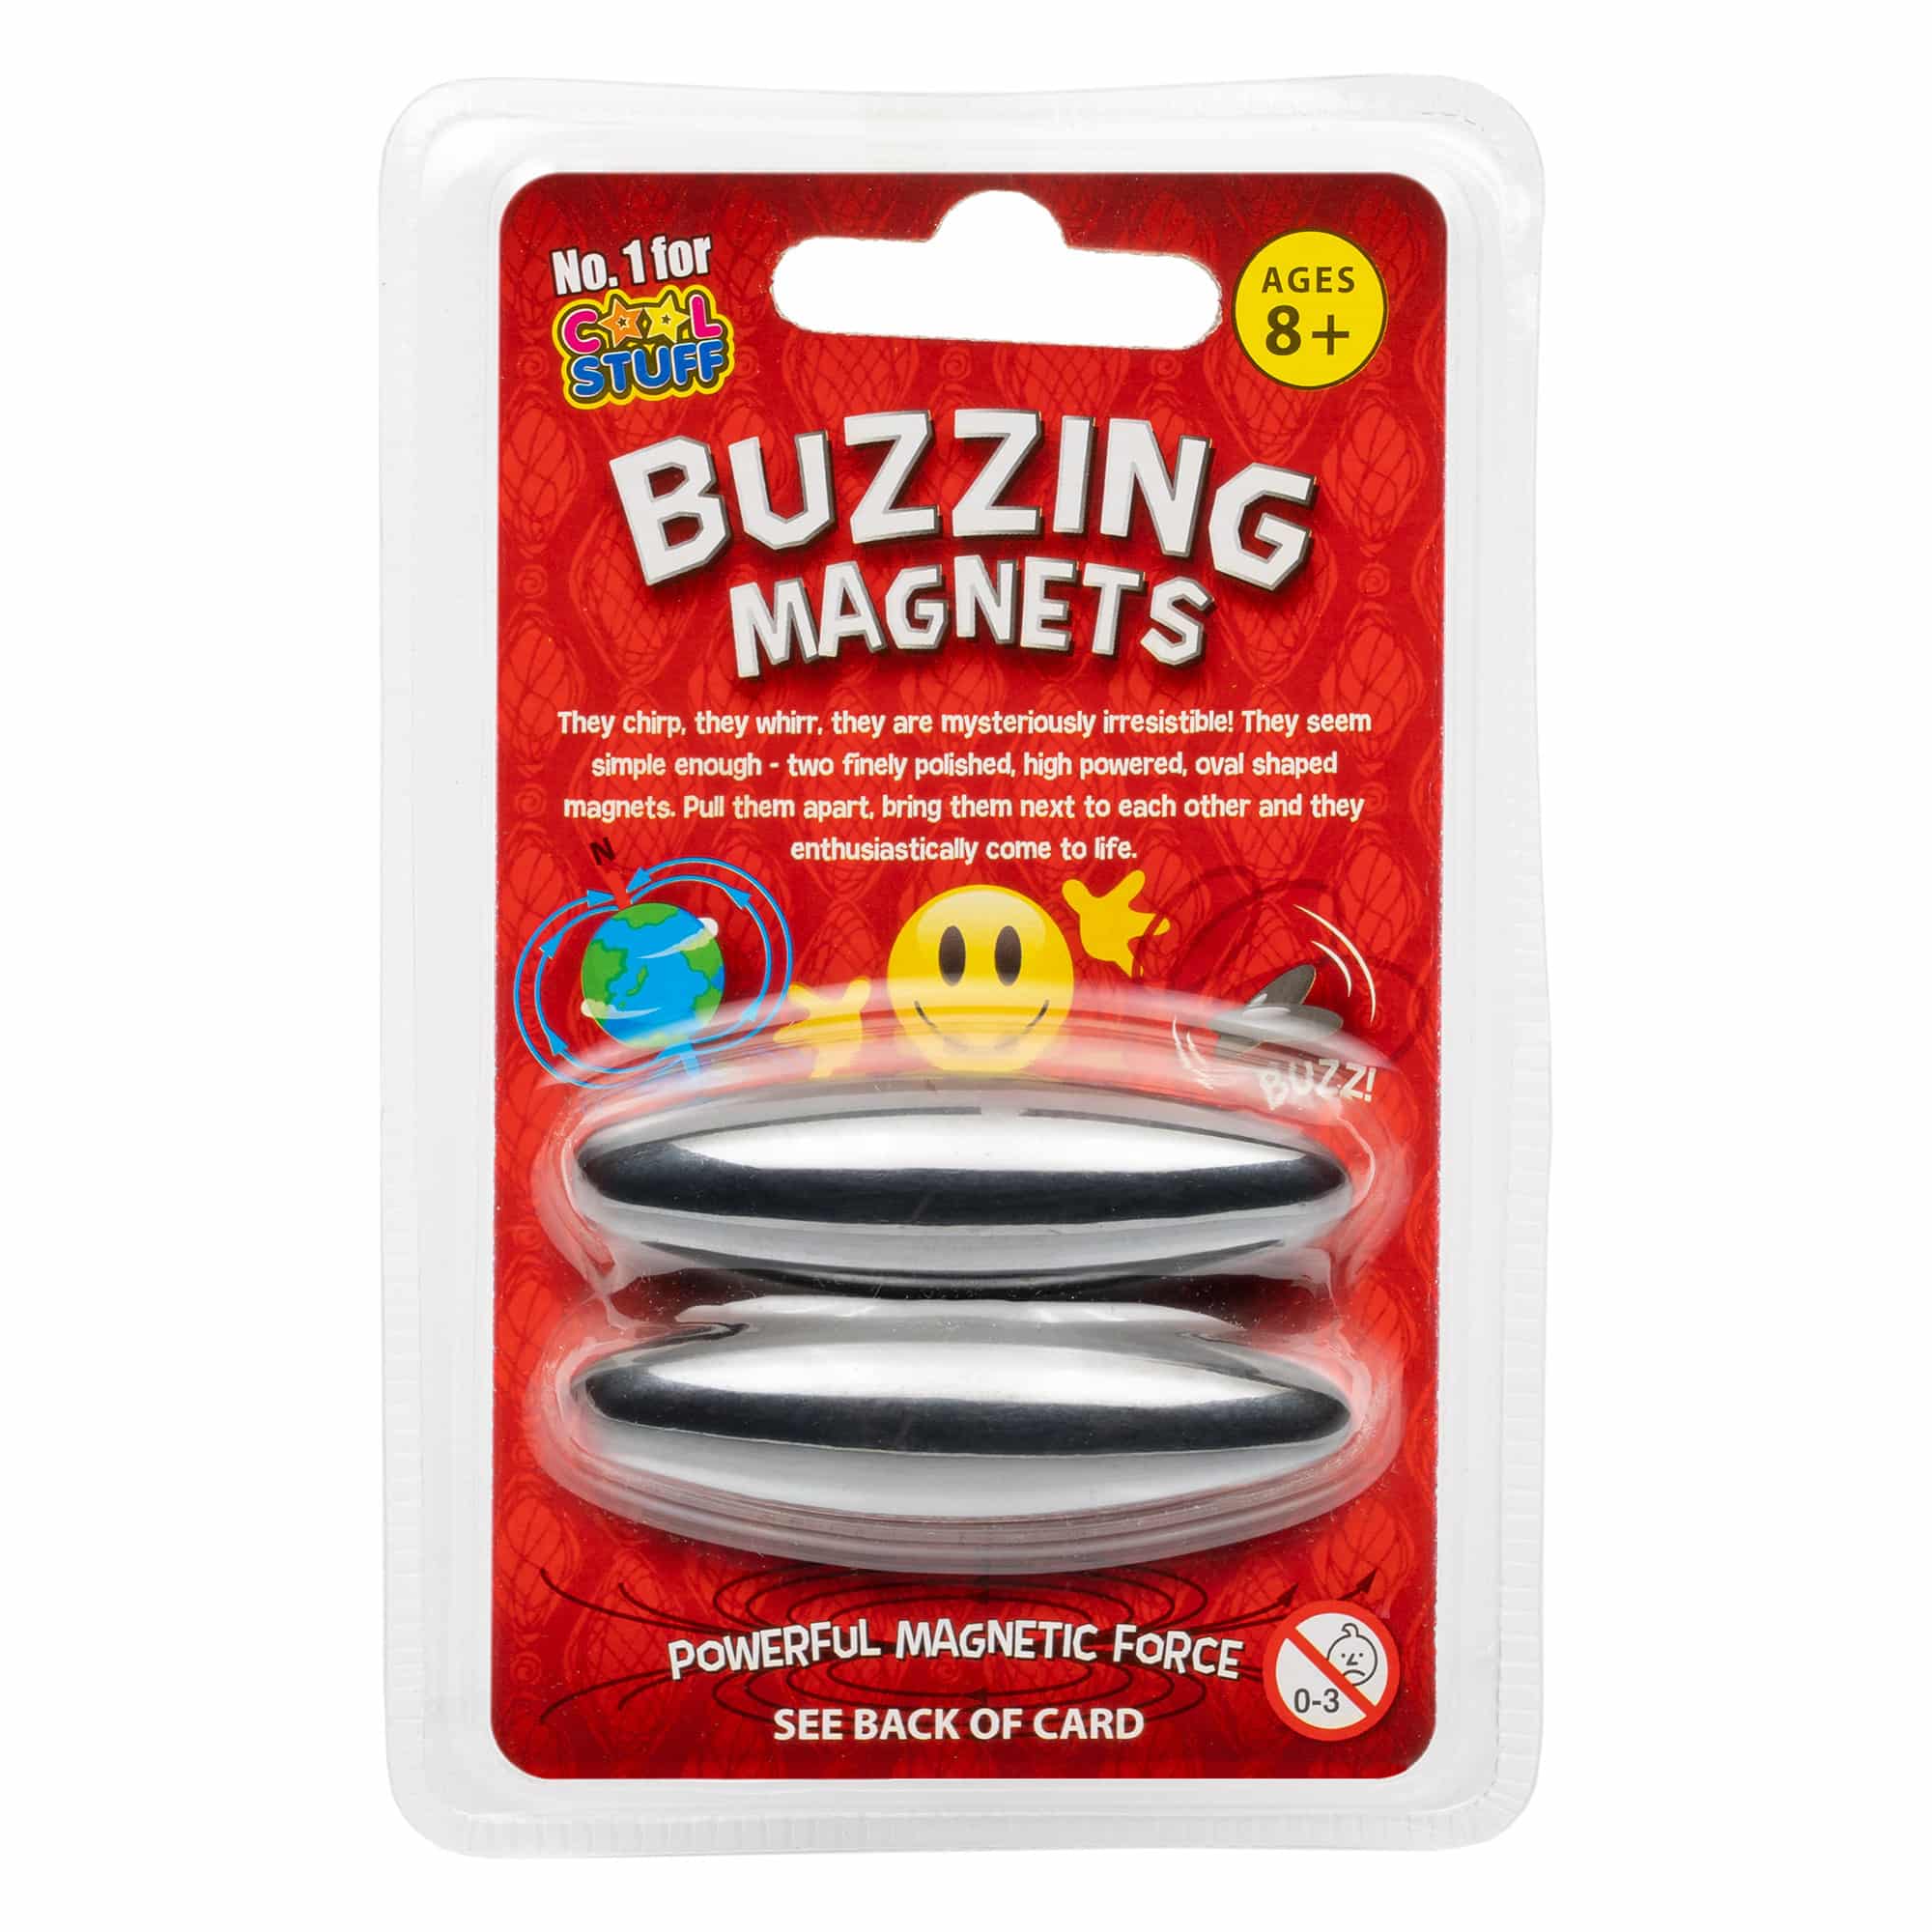 Buzzing Magnets - 1 Pair